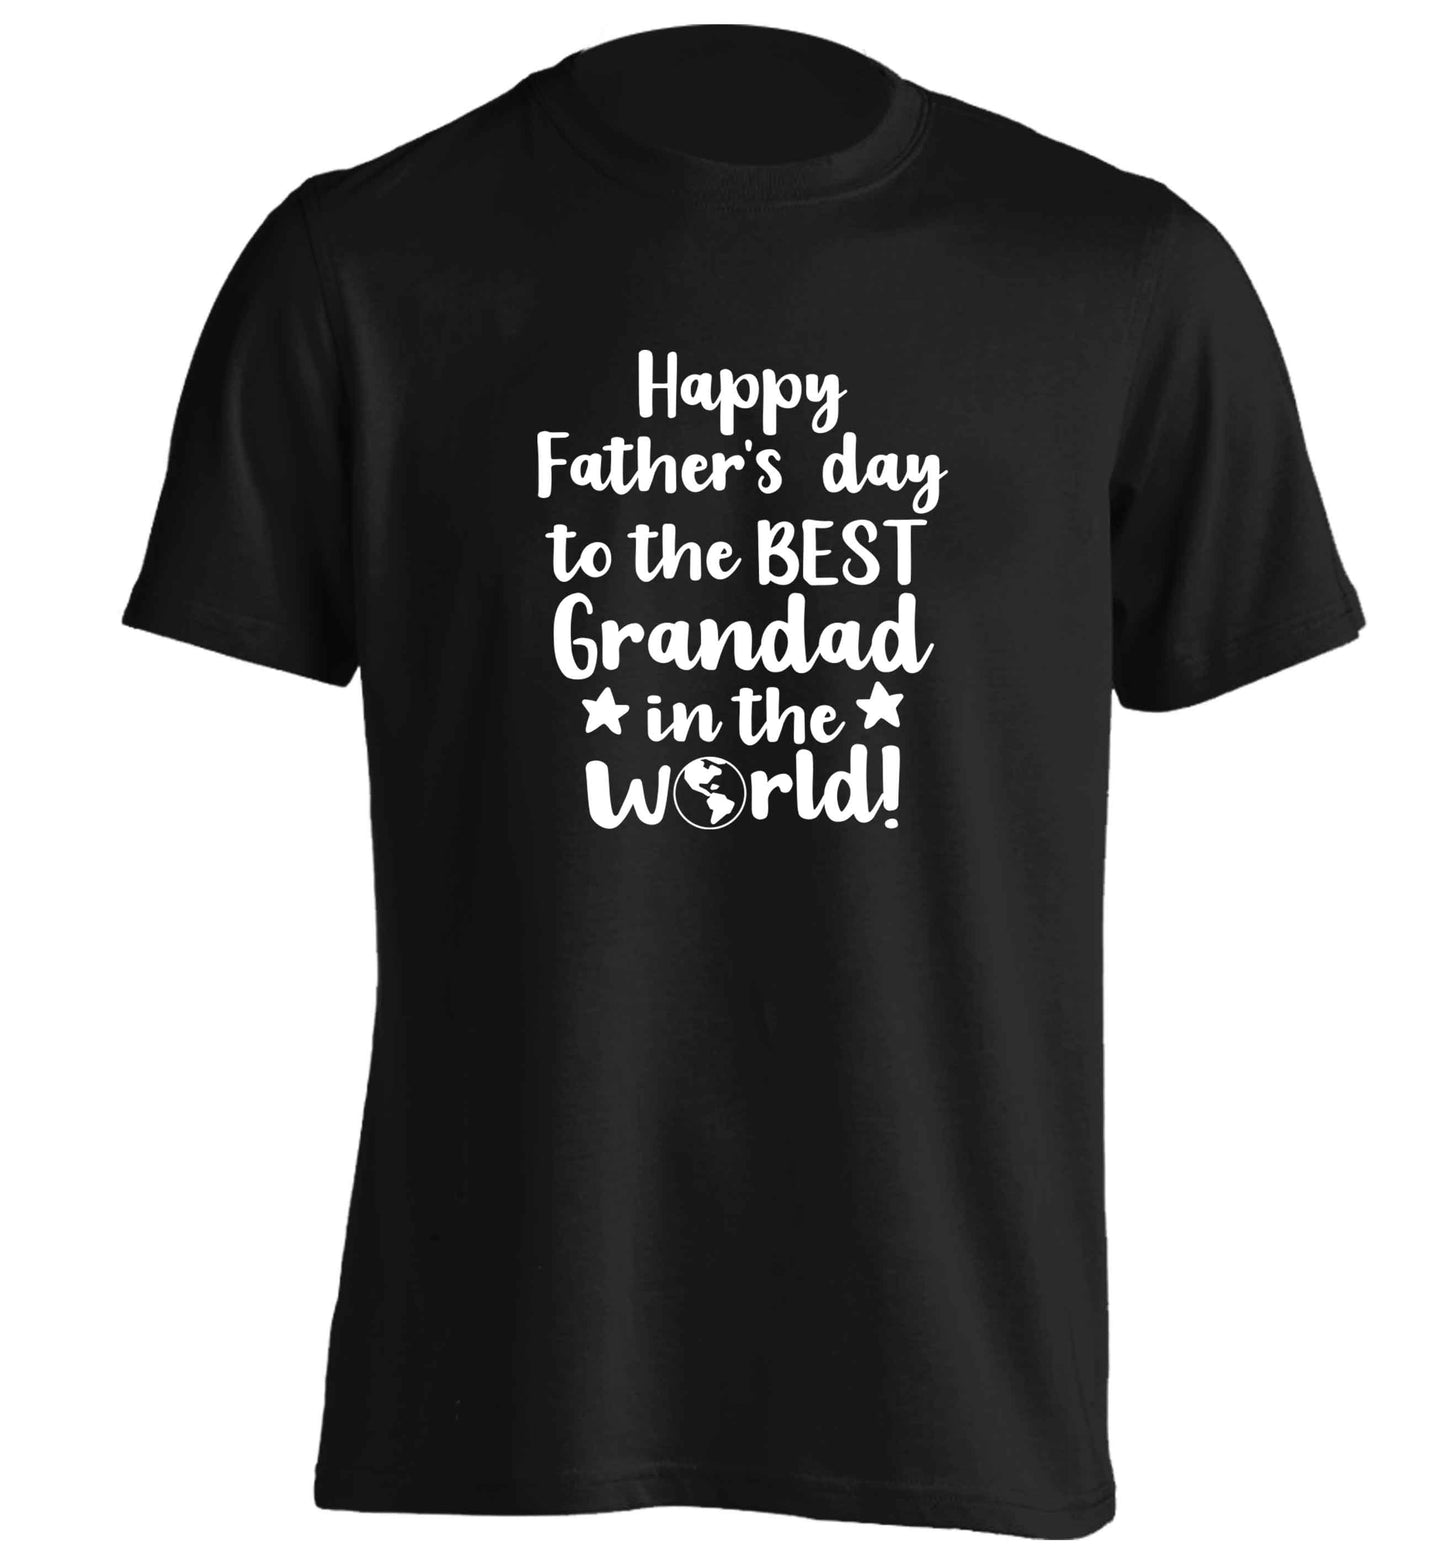 Happy Father's day to the best grandad in the world adults unisex black Tshirt 2XL